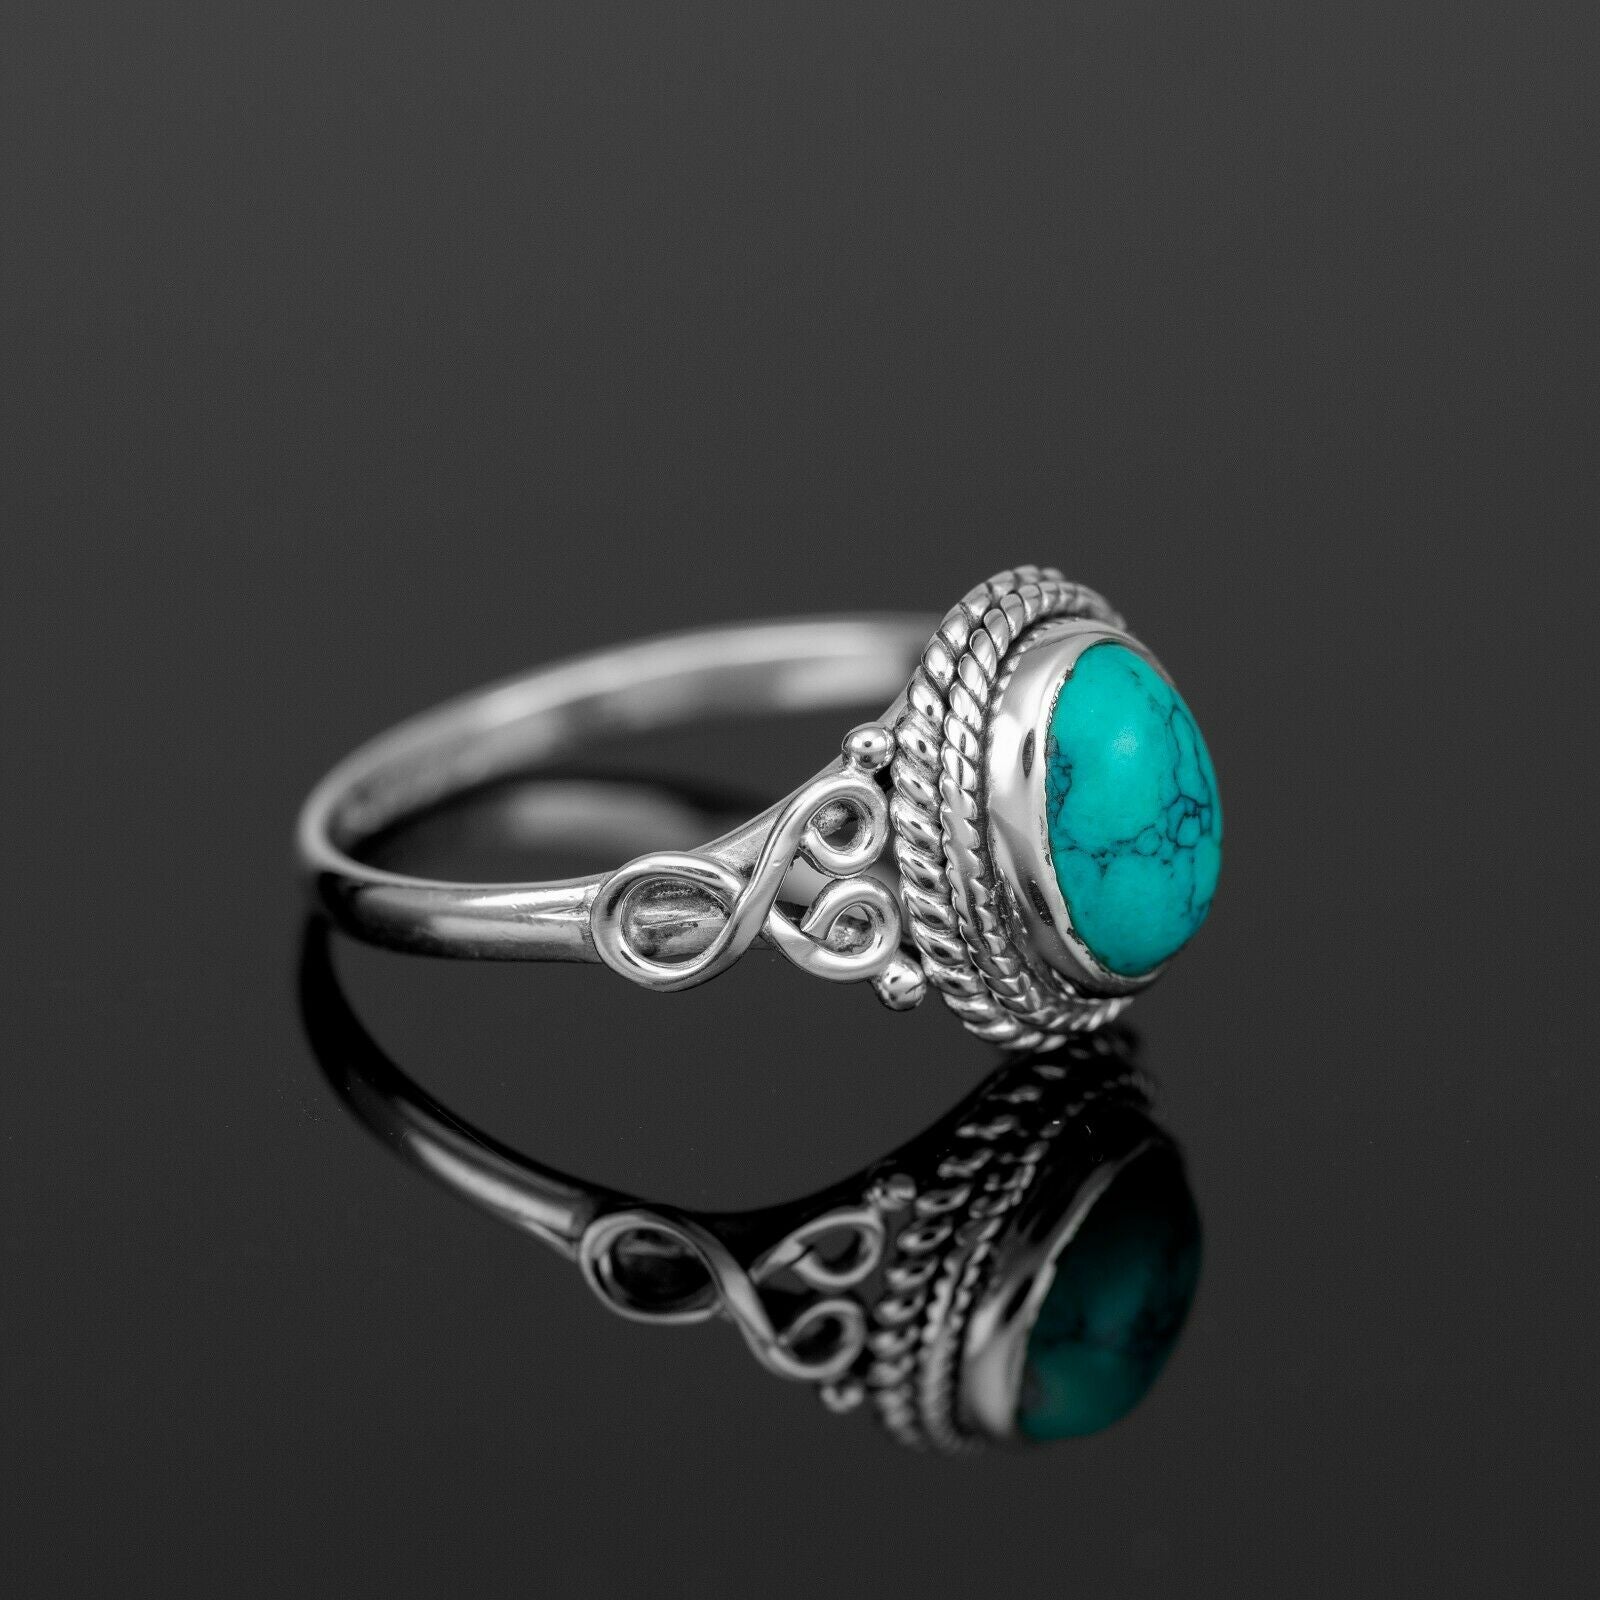 Oval Cut 925 Sterling Silver Ladies Turquoise Ring Gemstone Jewellery Gift Boxed